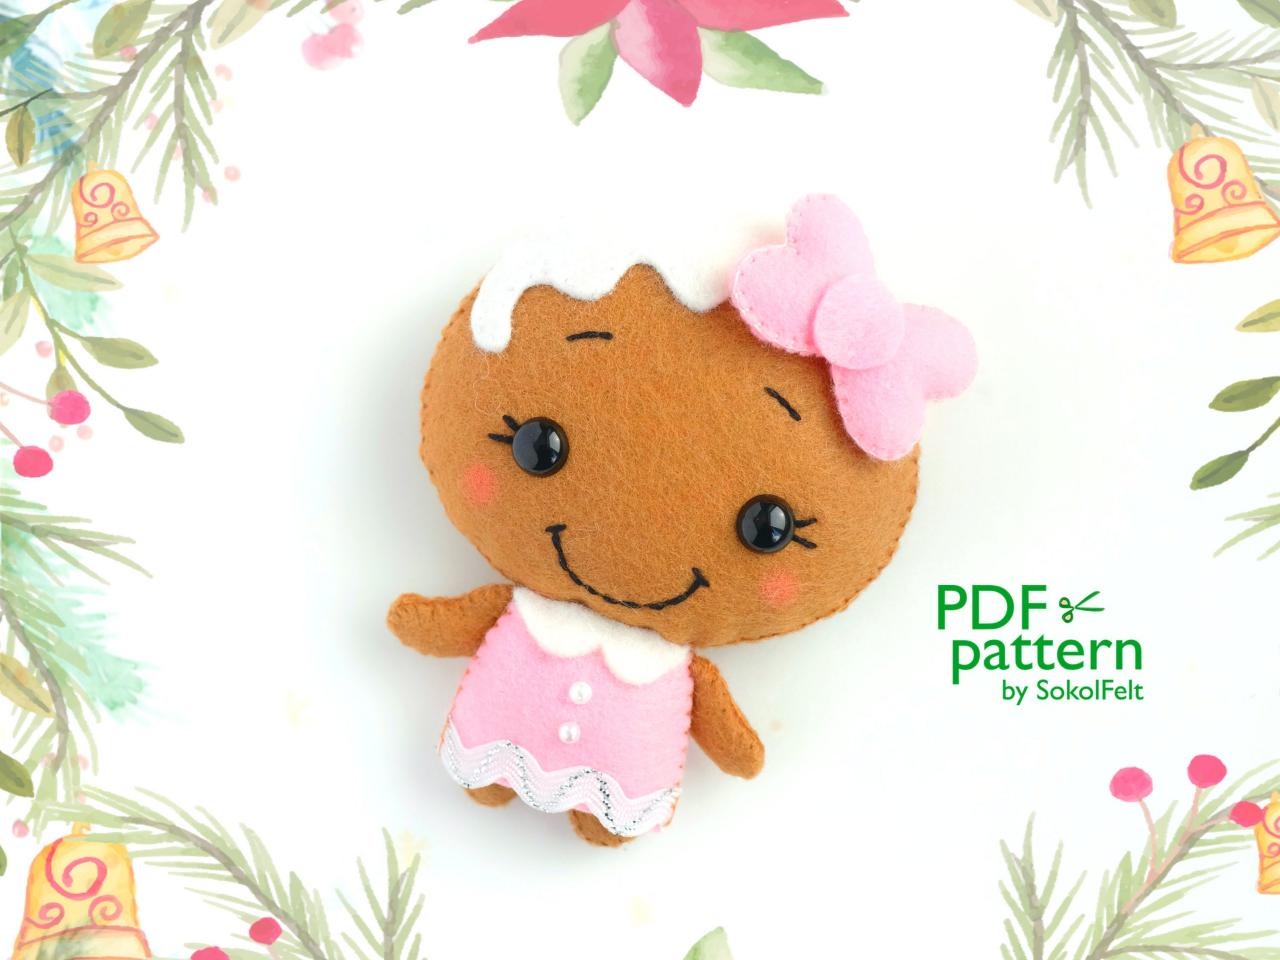 Felt Mrs. Gingerbread Toy Pdf Pattern, Christmas Gingerbread Man Sewing Digital Tutorial, Christmas Tree Toy Ornament, Baby Crib Mobile Toy